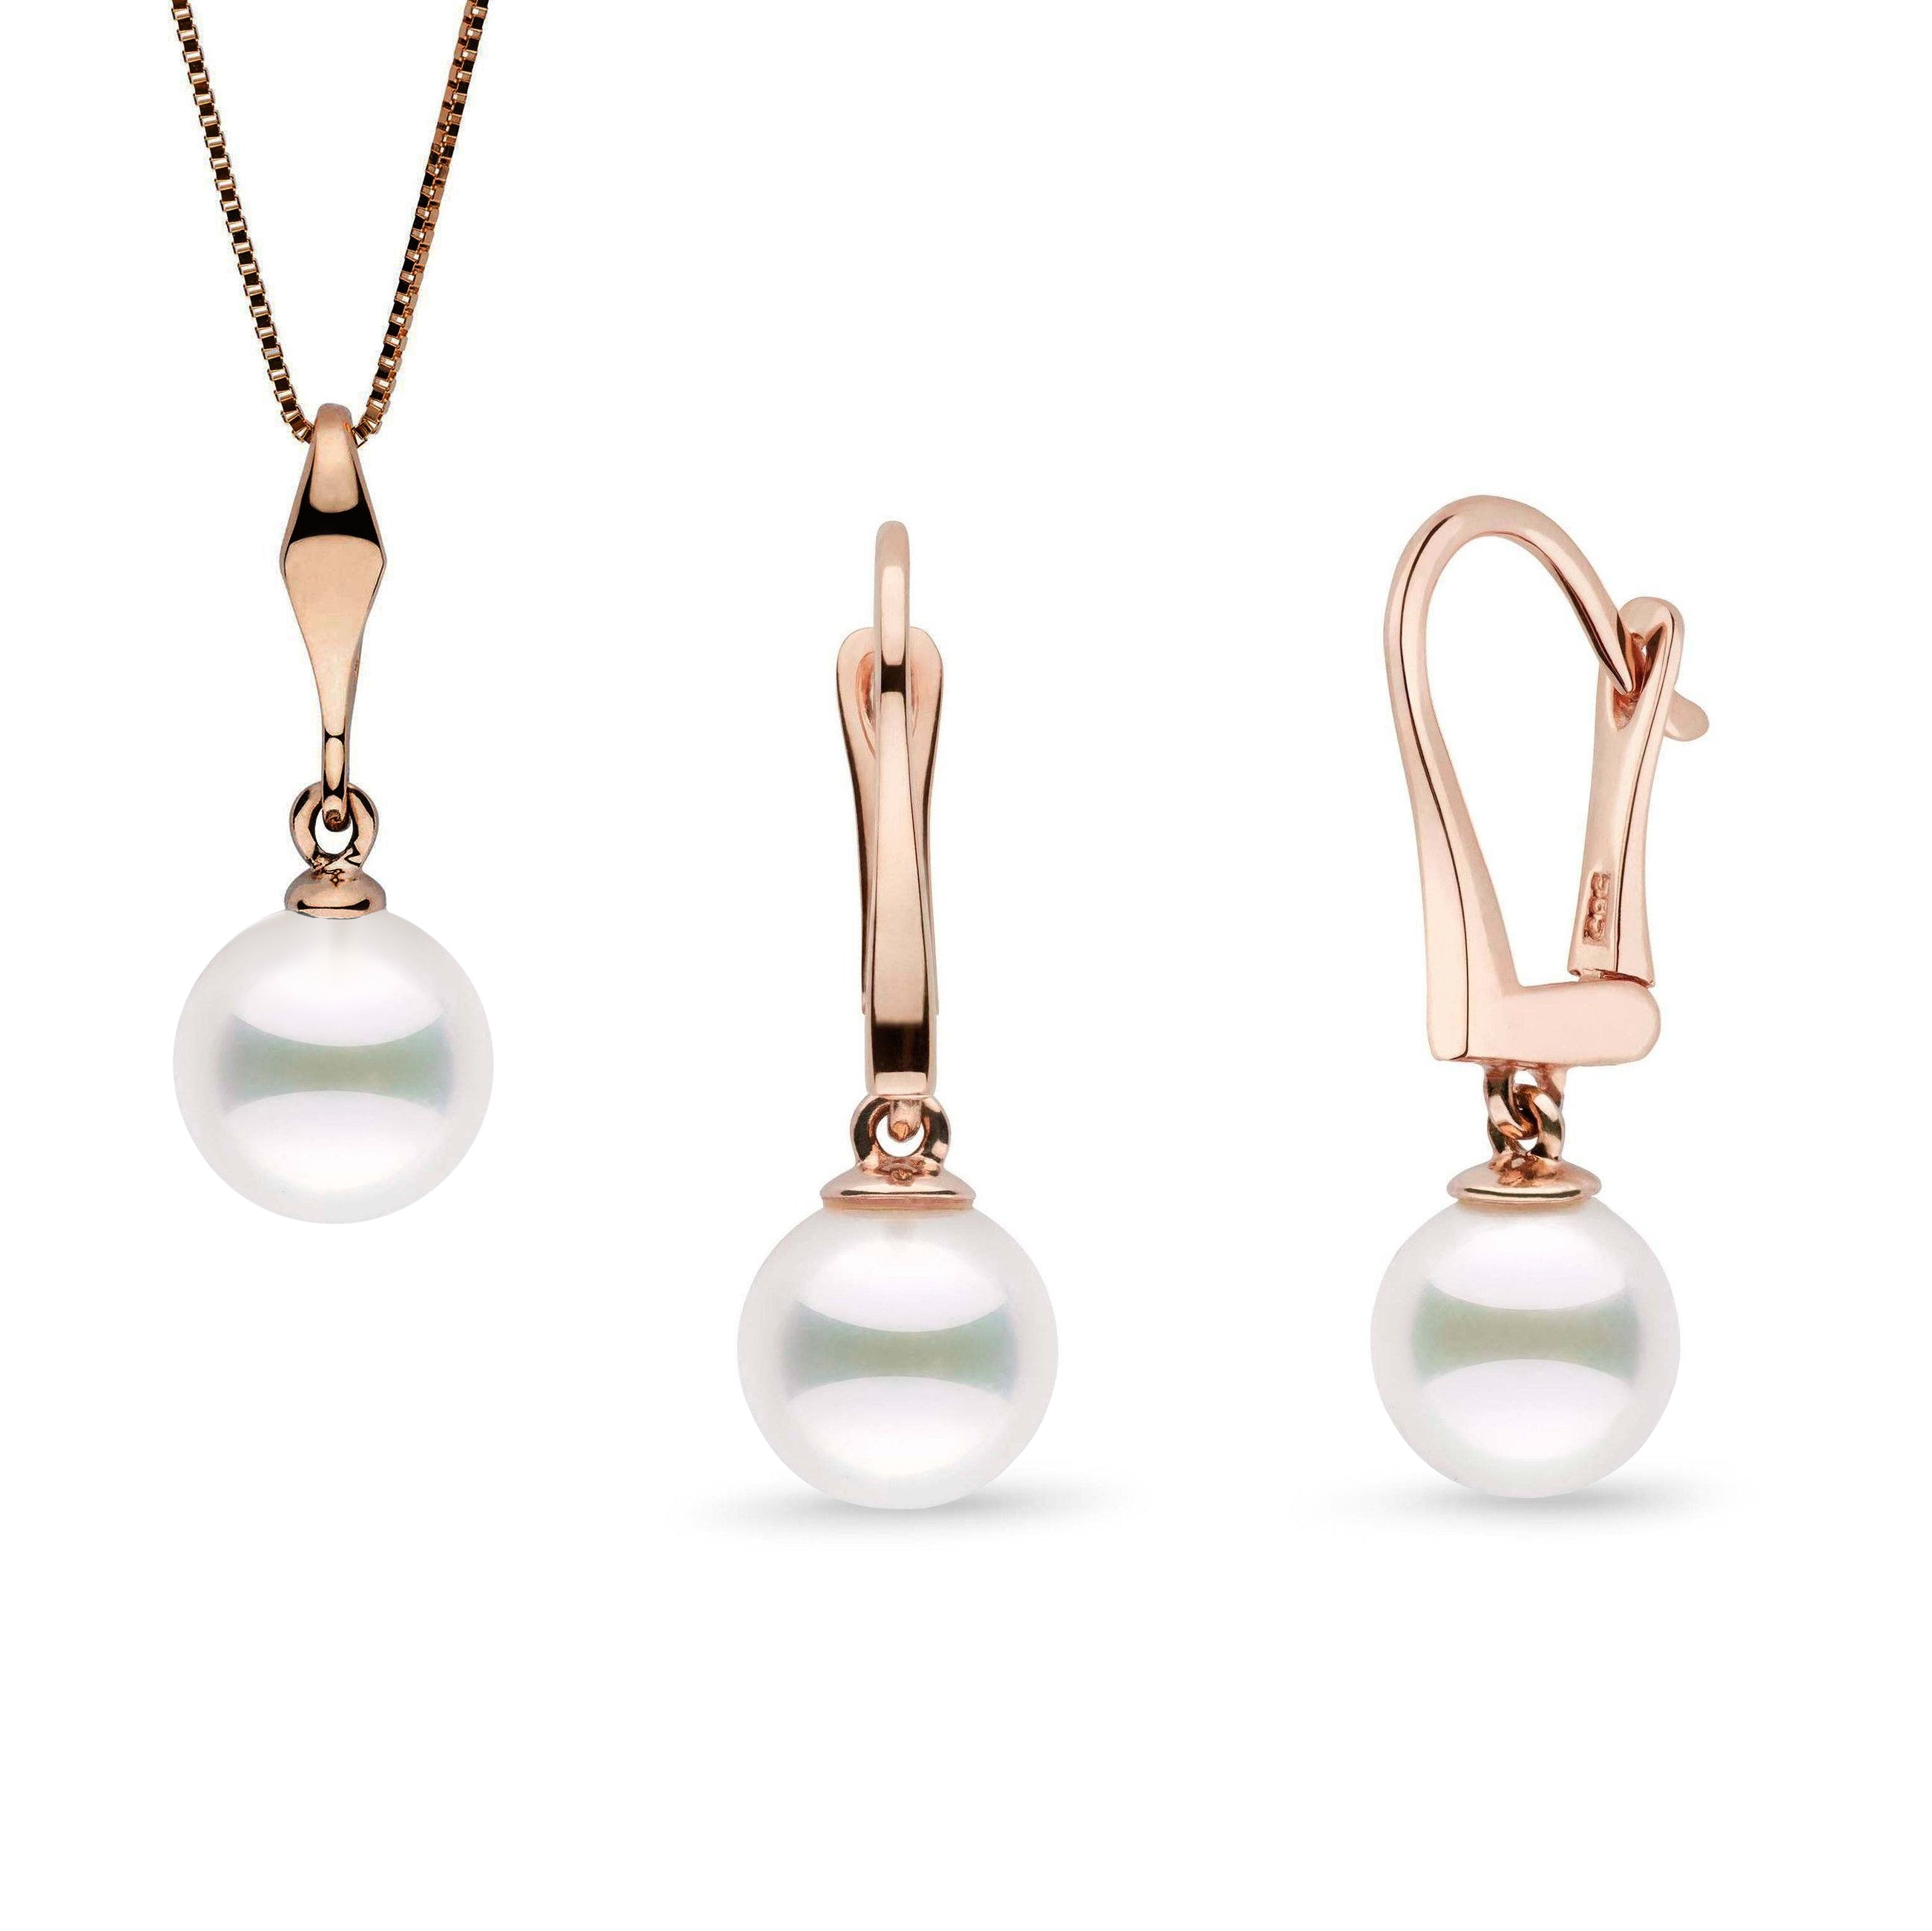 Essential Classic Collection 7.5-8.0 mm Akoya Pearl Pendant and Earrings Set rose gold